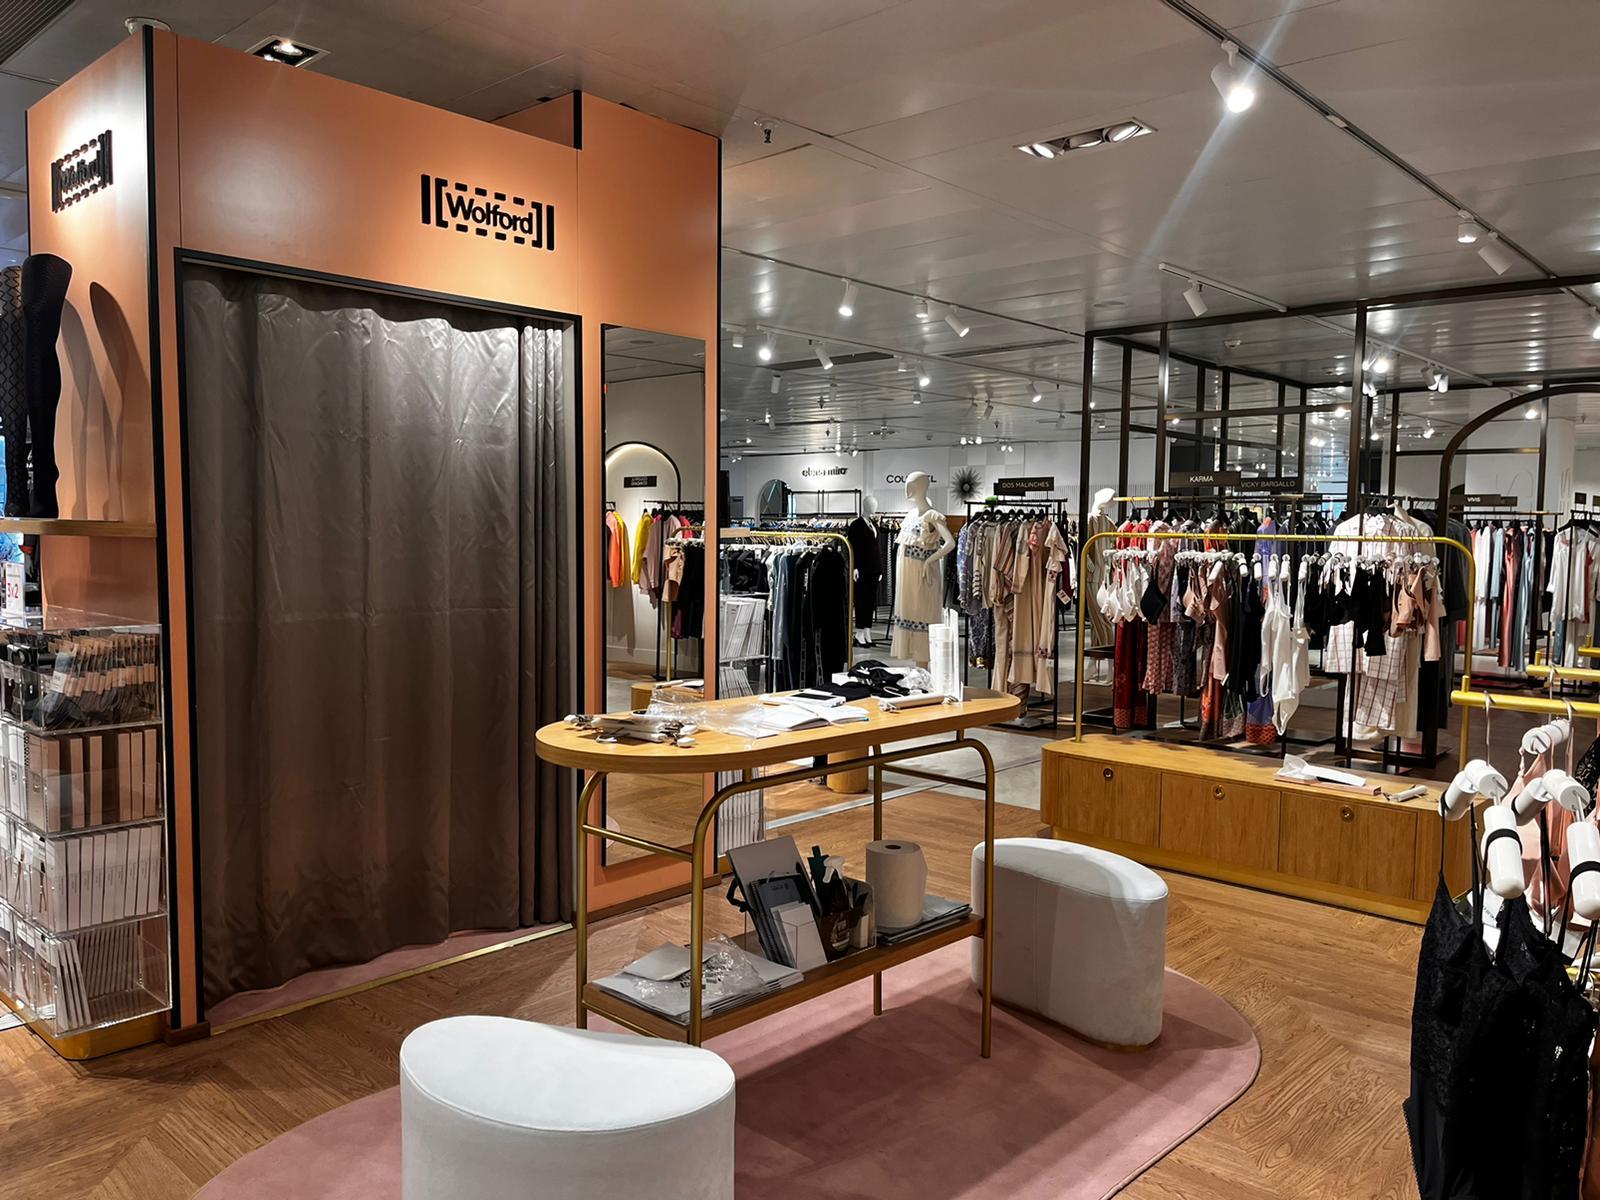 Wolford's luxury boutique new concept